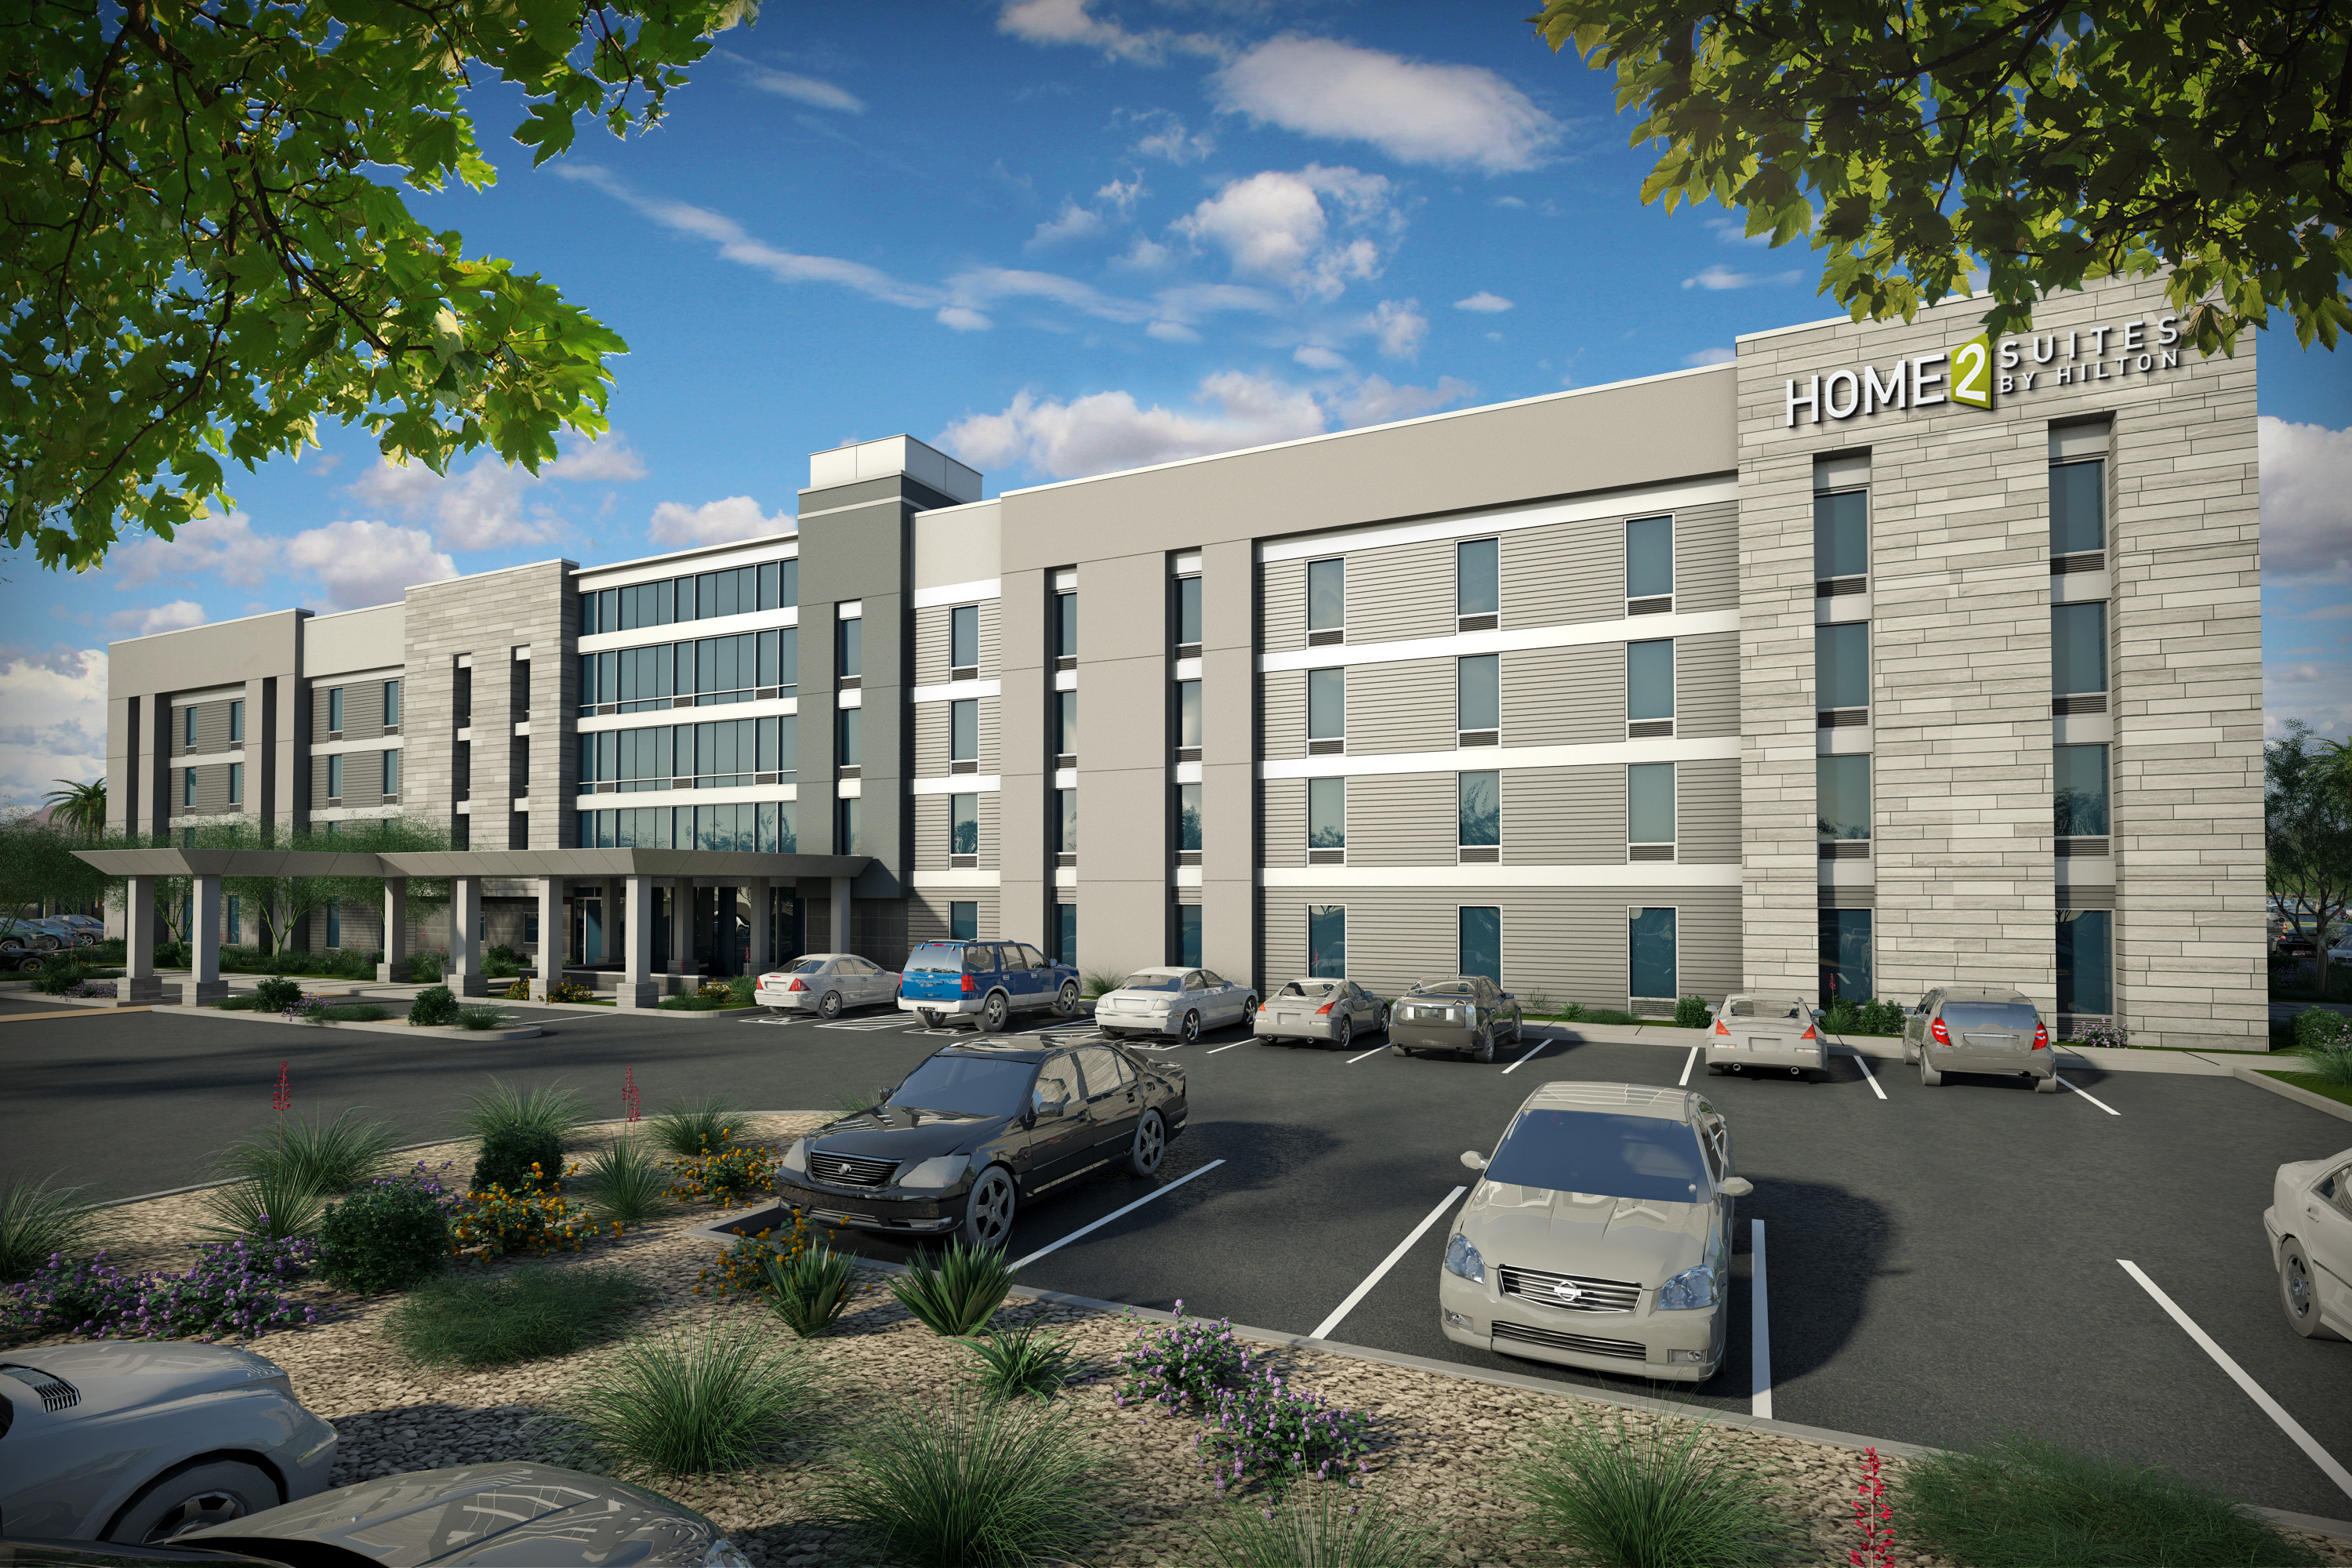 Home2 Suites by Hilton Chandler